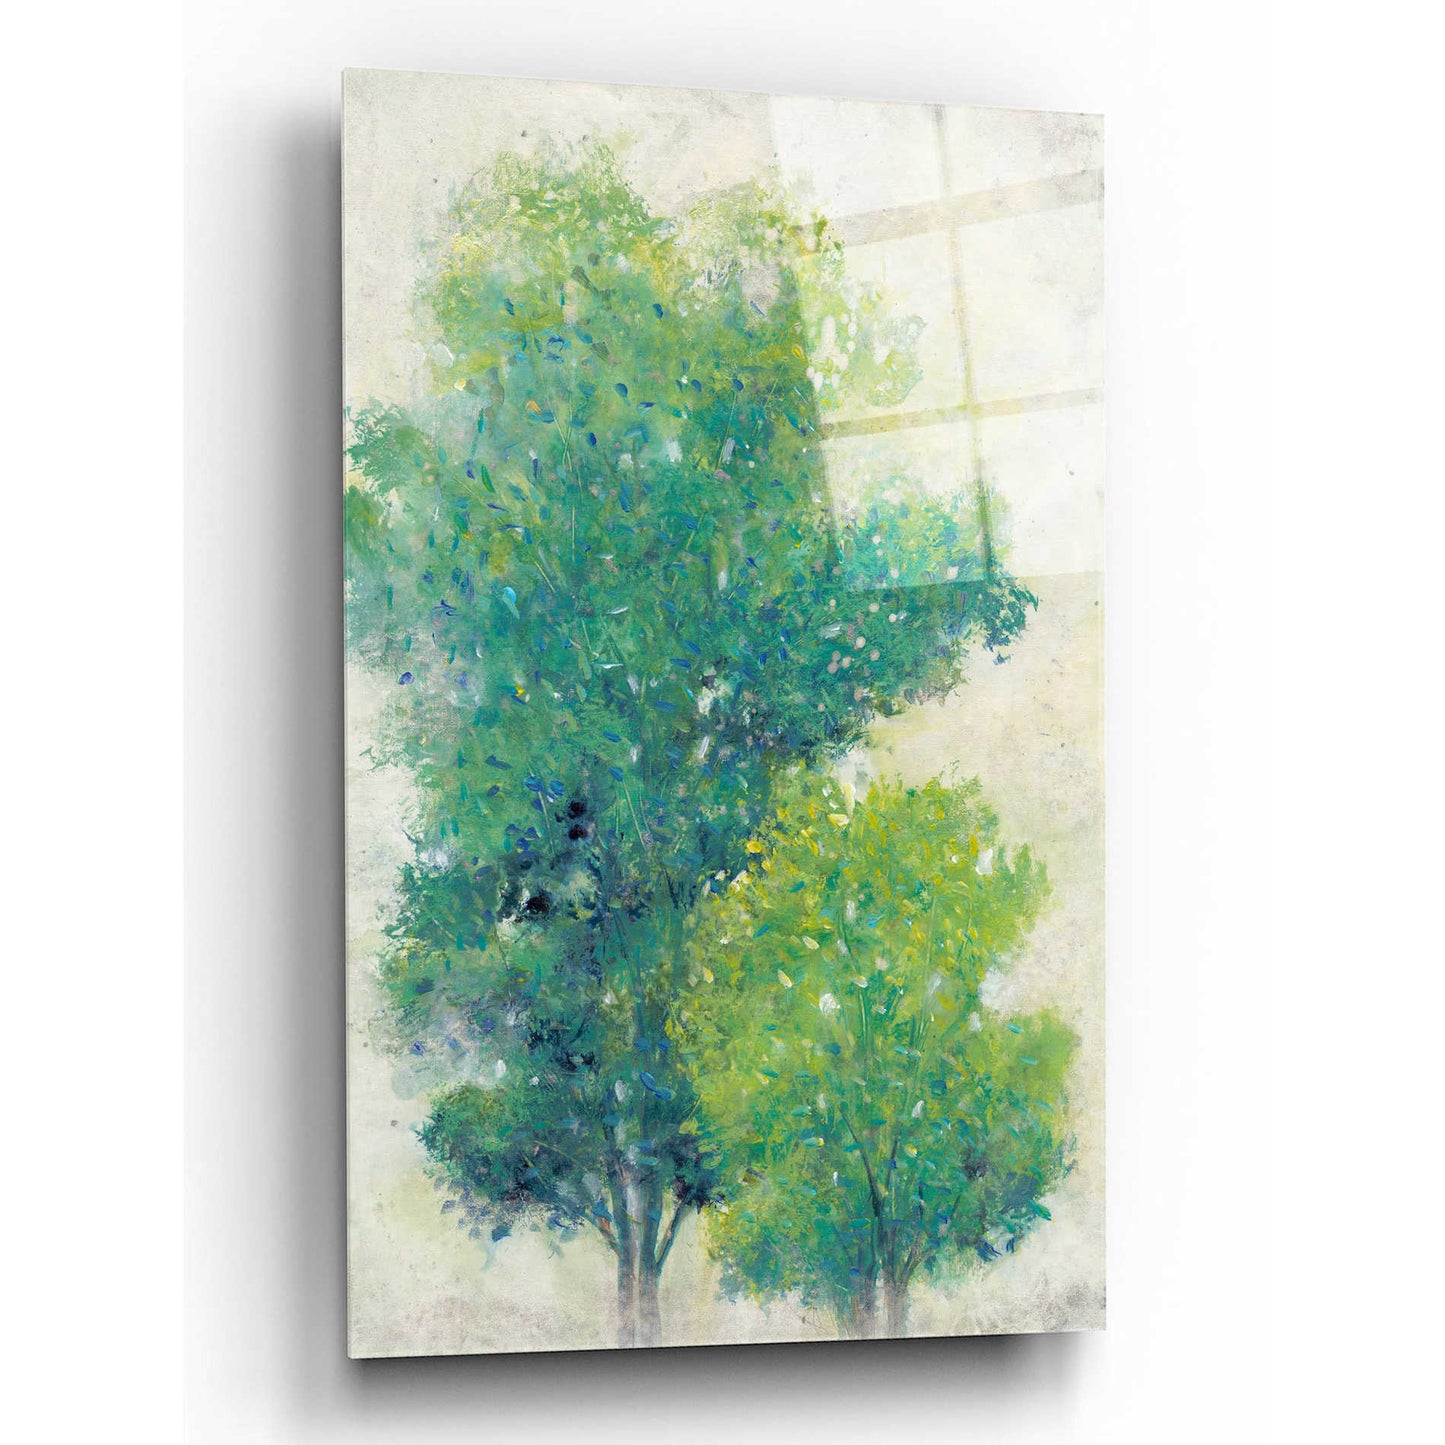 Epic Art 'A Pair of Trees I' by Tim O'Toole, Acrylic Glass Wall Art,12x16